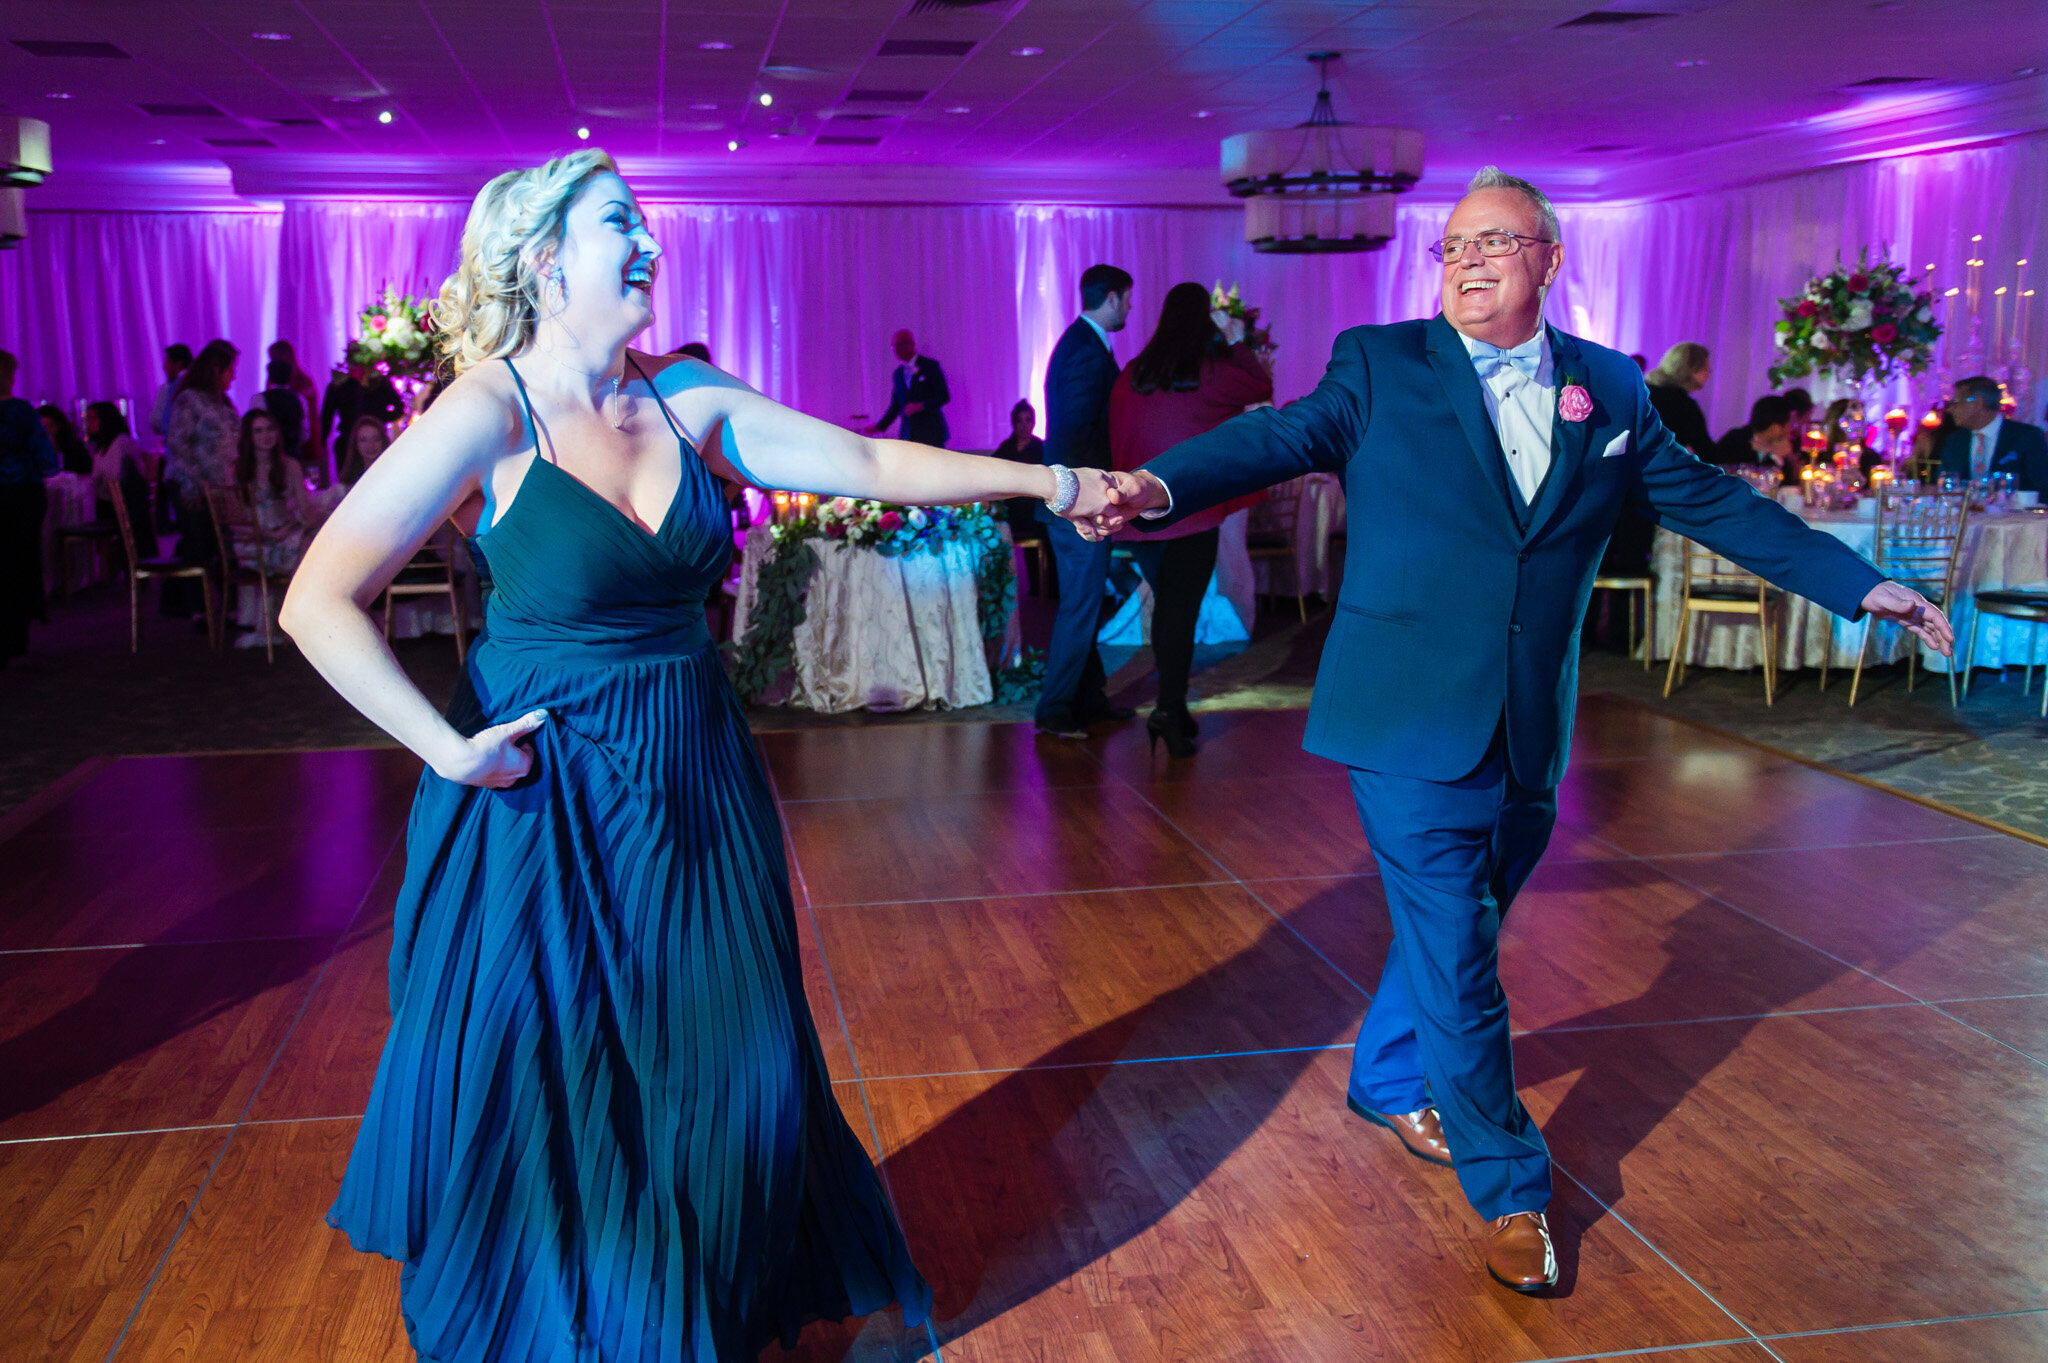 Groom and daughter dancing at wedding reception in northern virginia